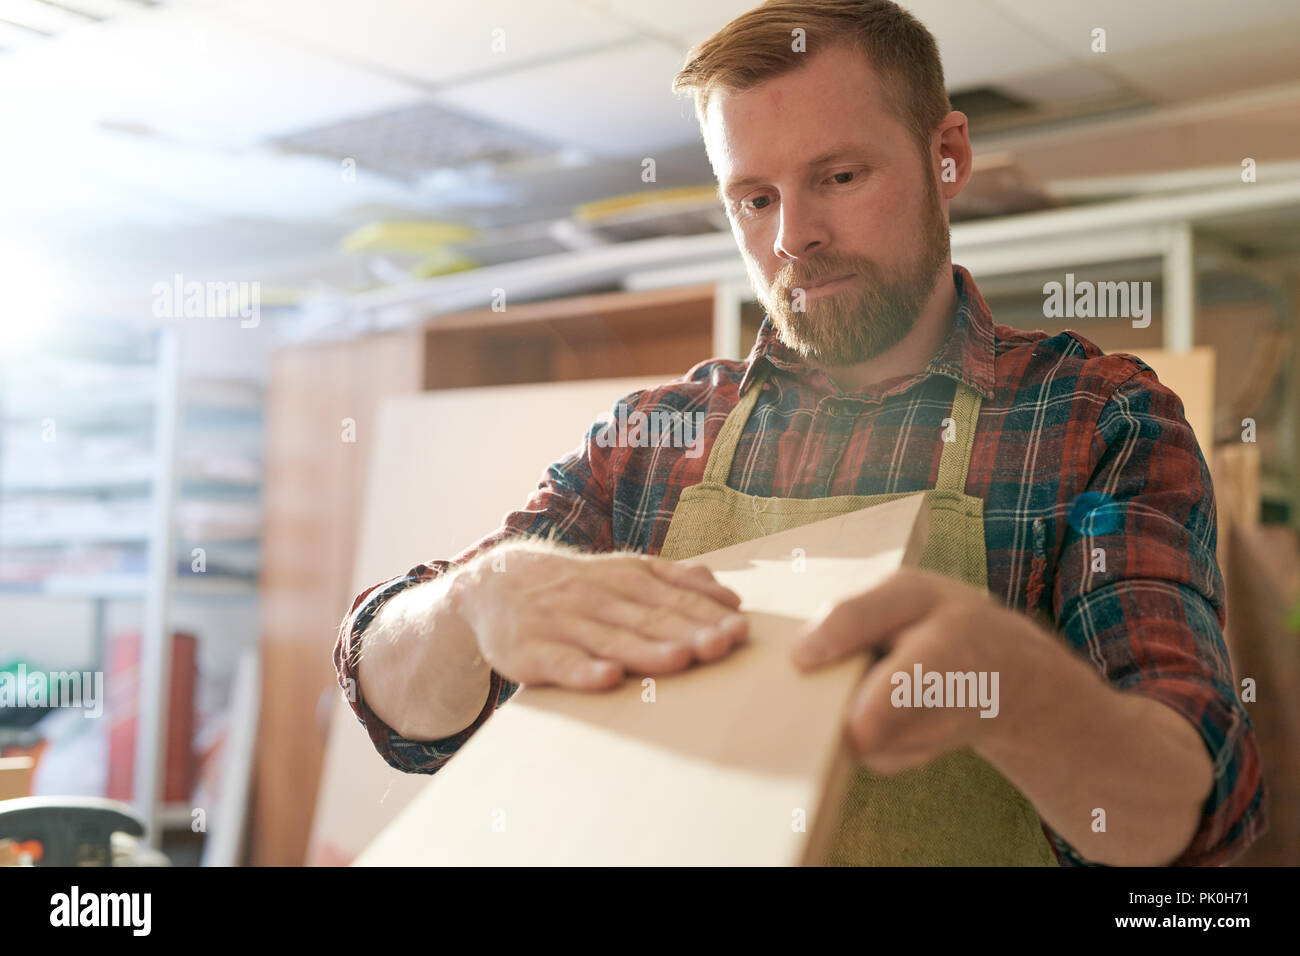 Carpenter working with wood Stock Photo